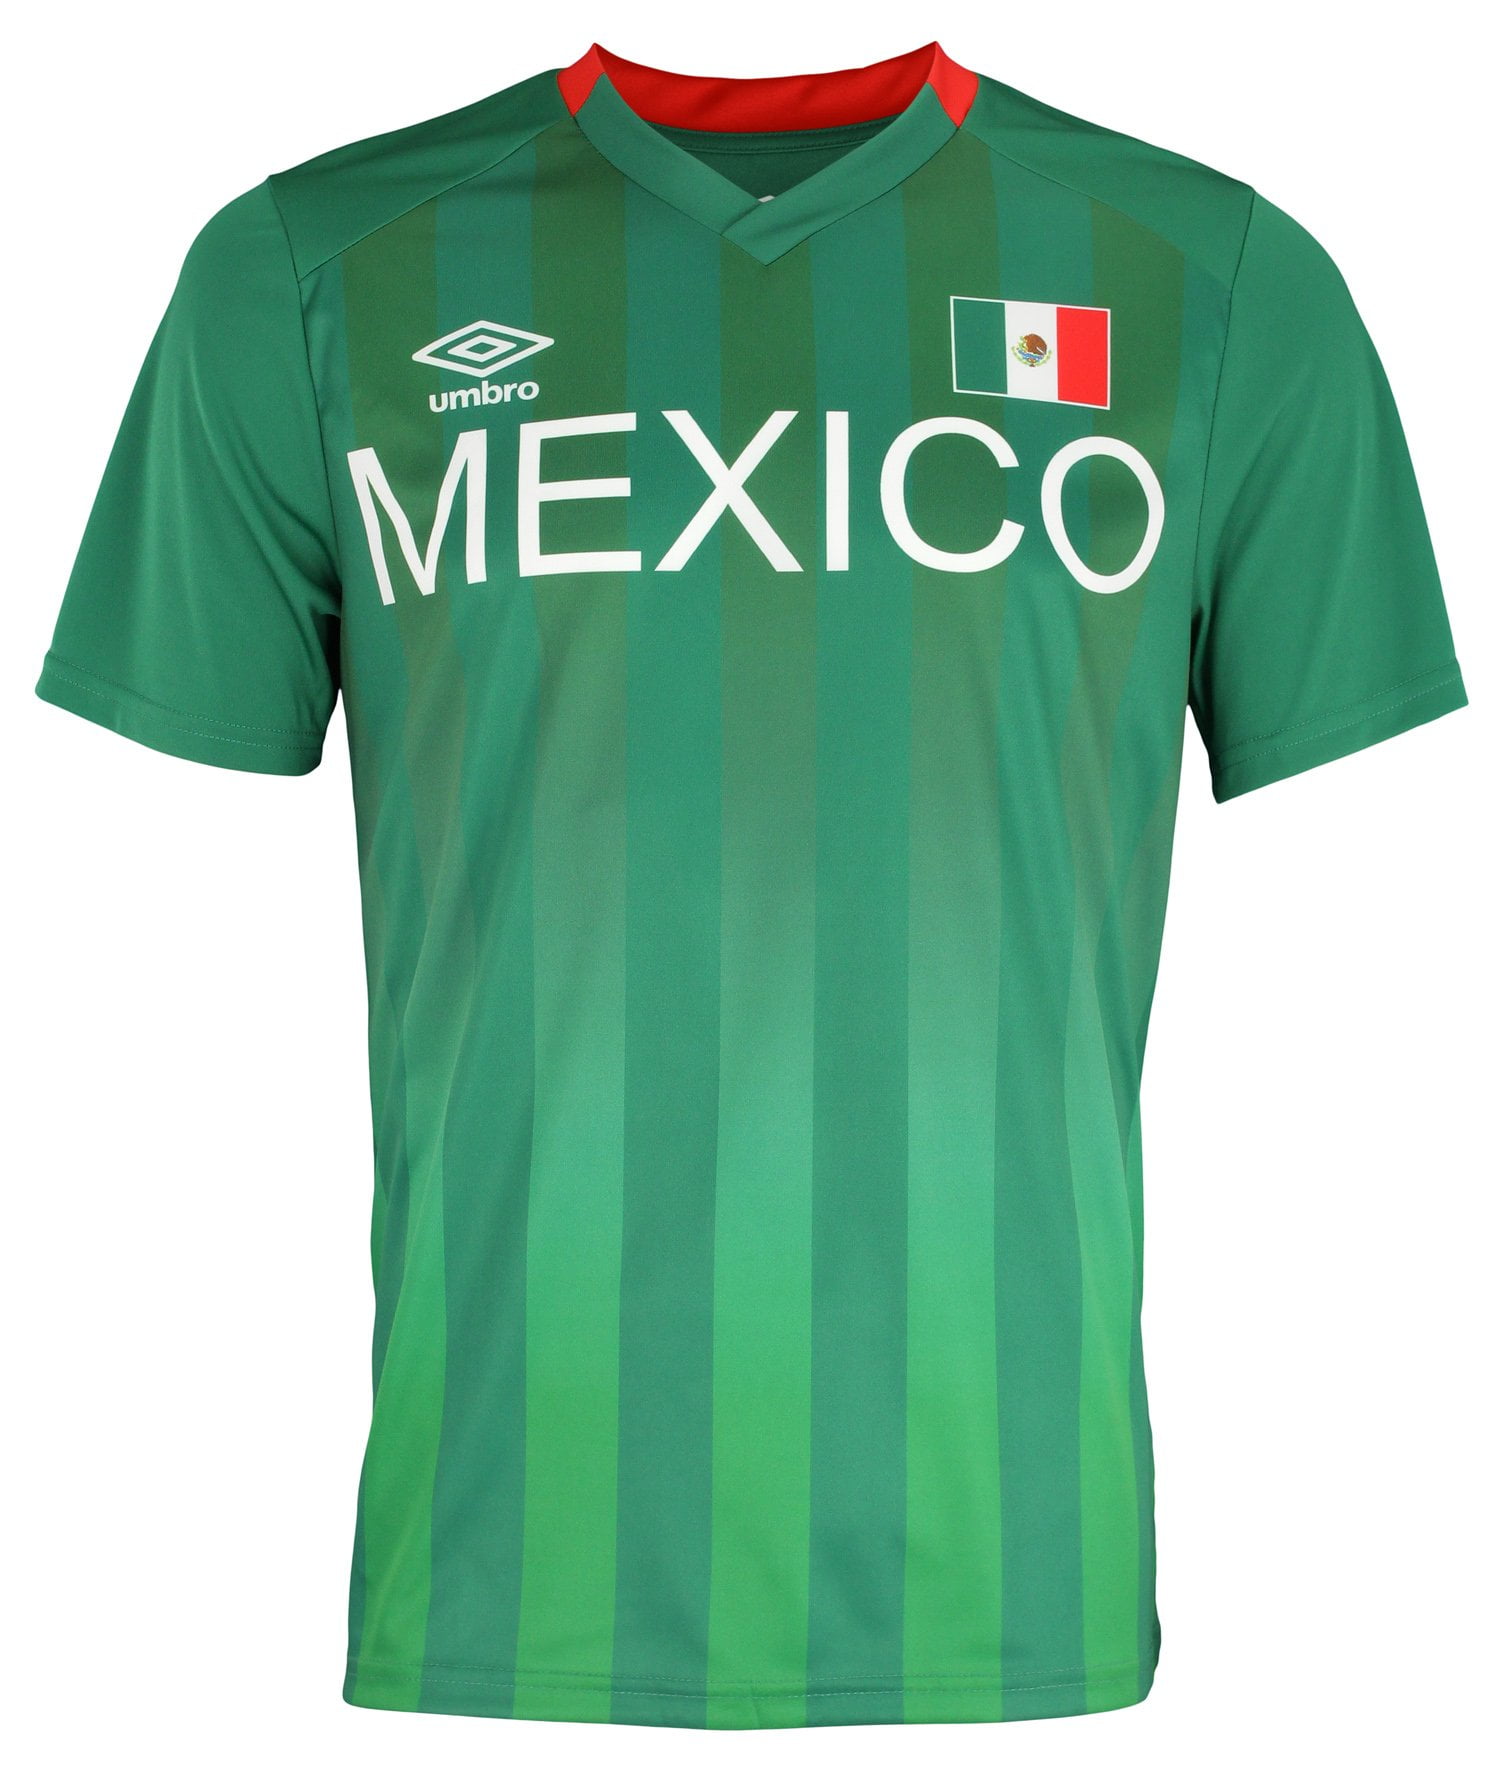 Umbro Men's Mexico Sublimated Soccer Jersey Shirt, Mex Green/White